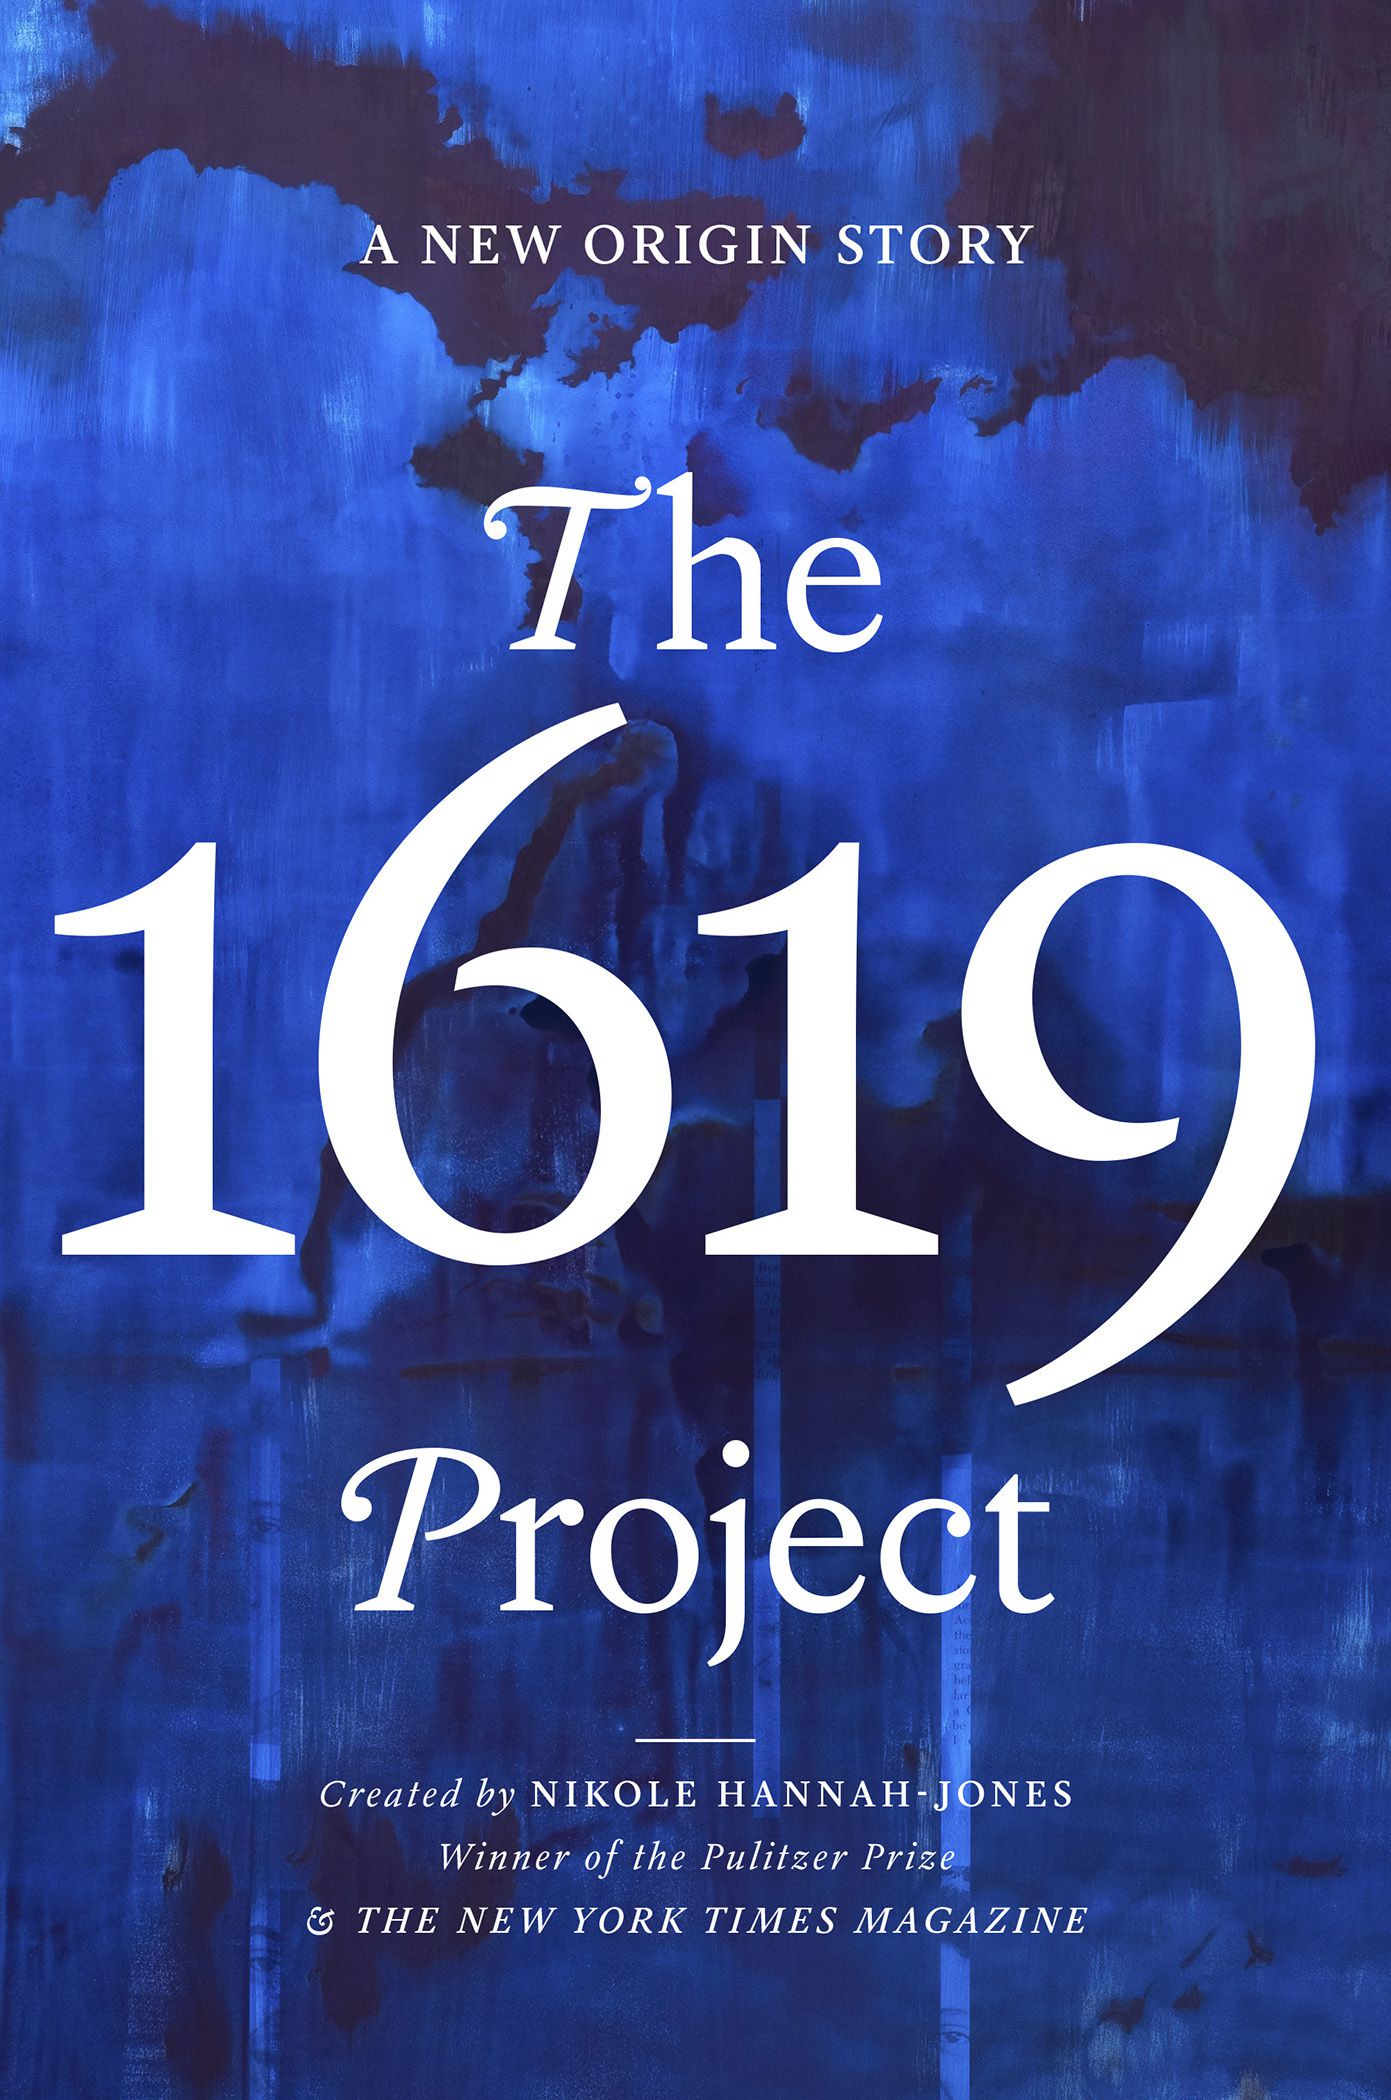 Two books based on ‘1619 Project’ coming out in November